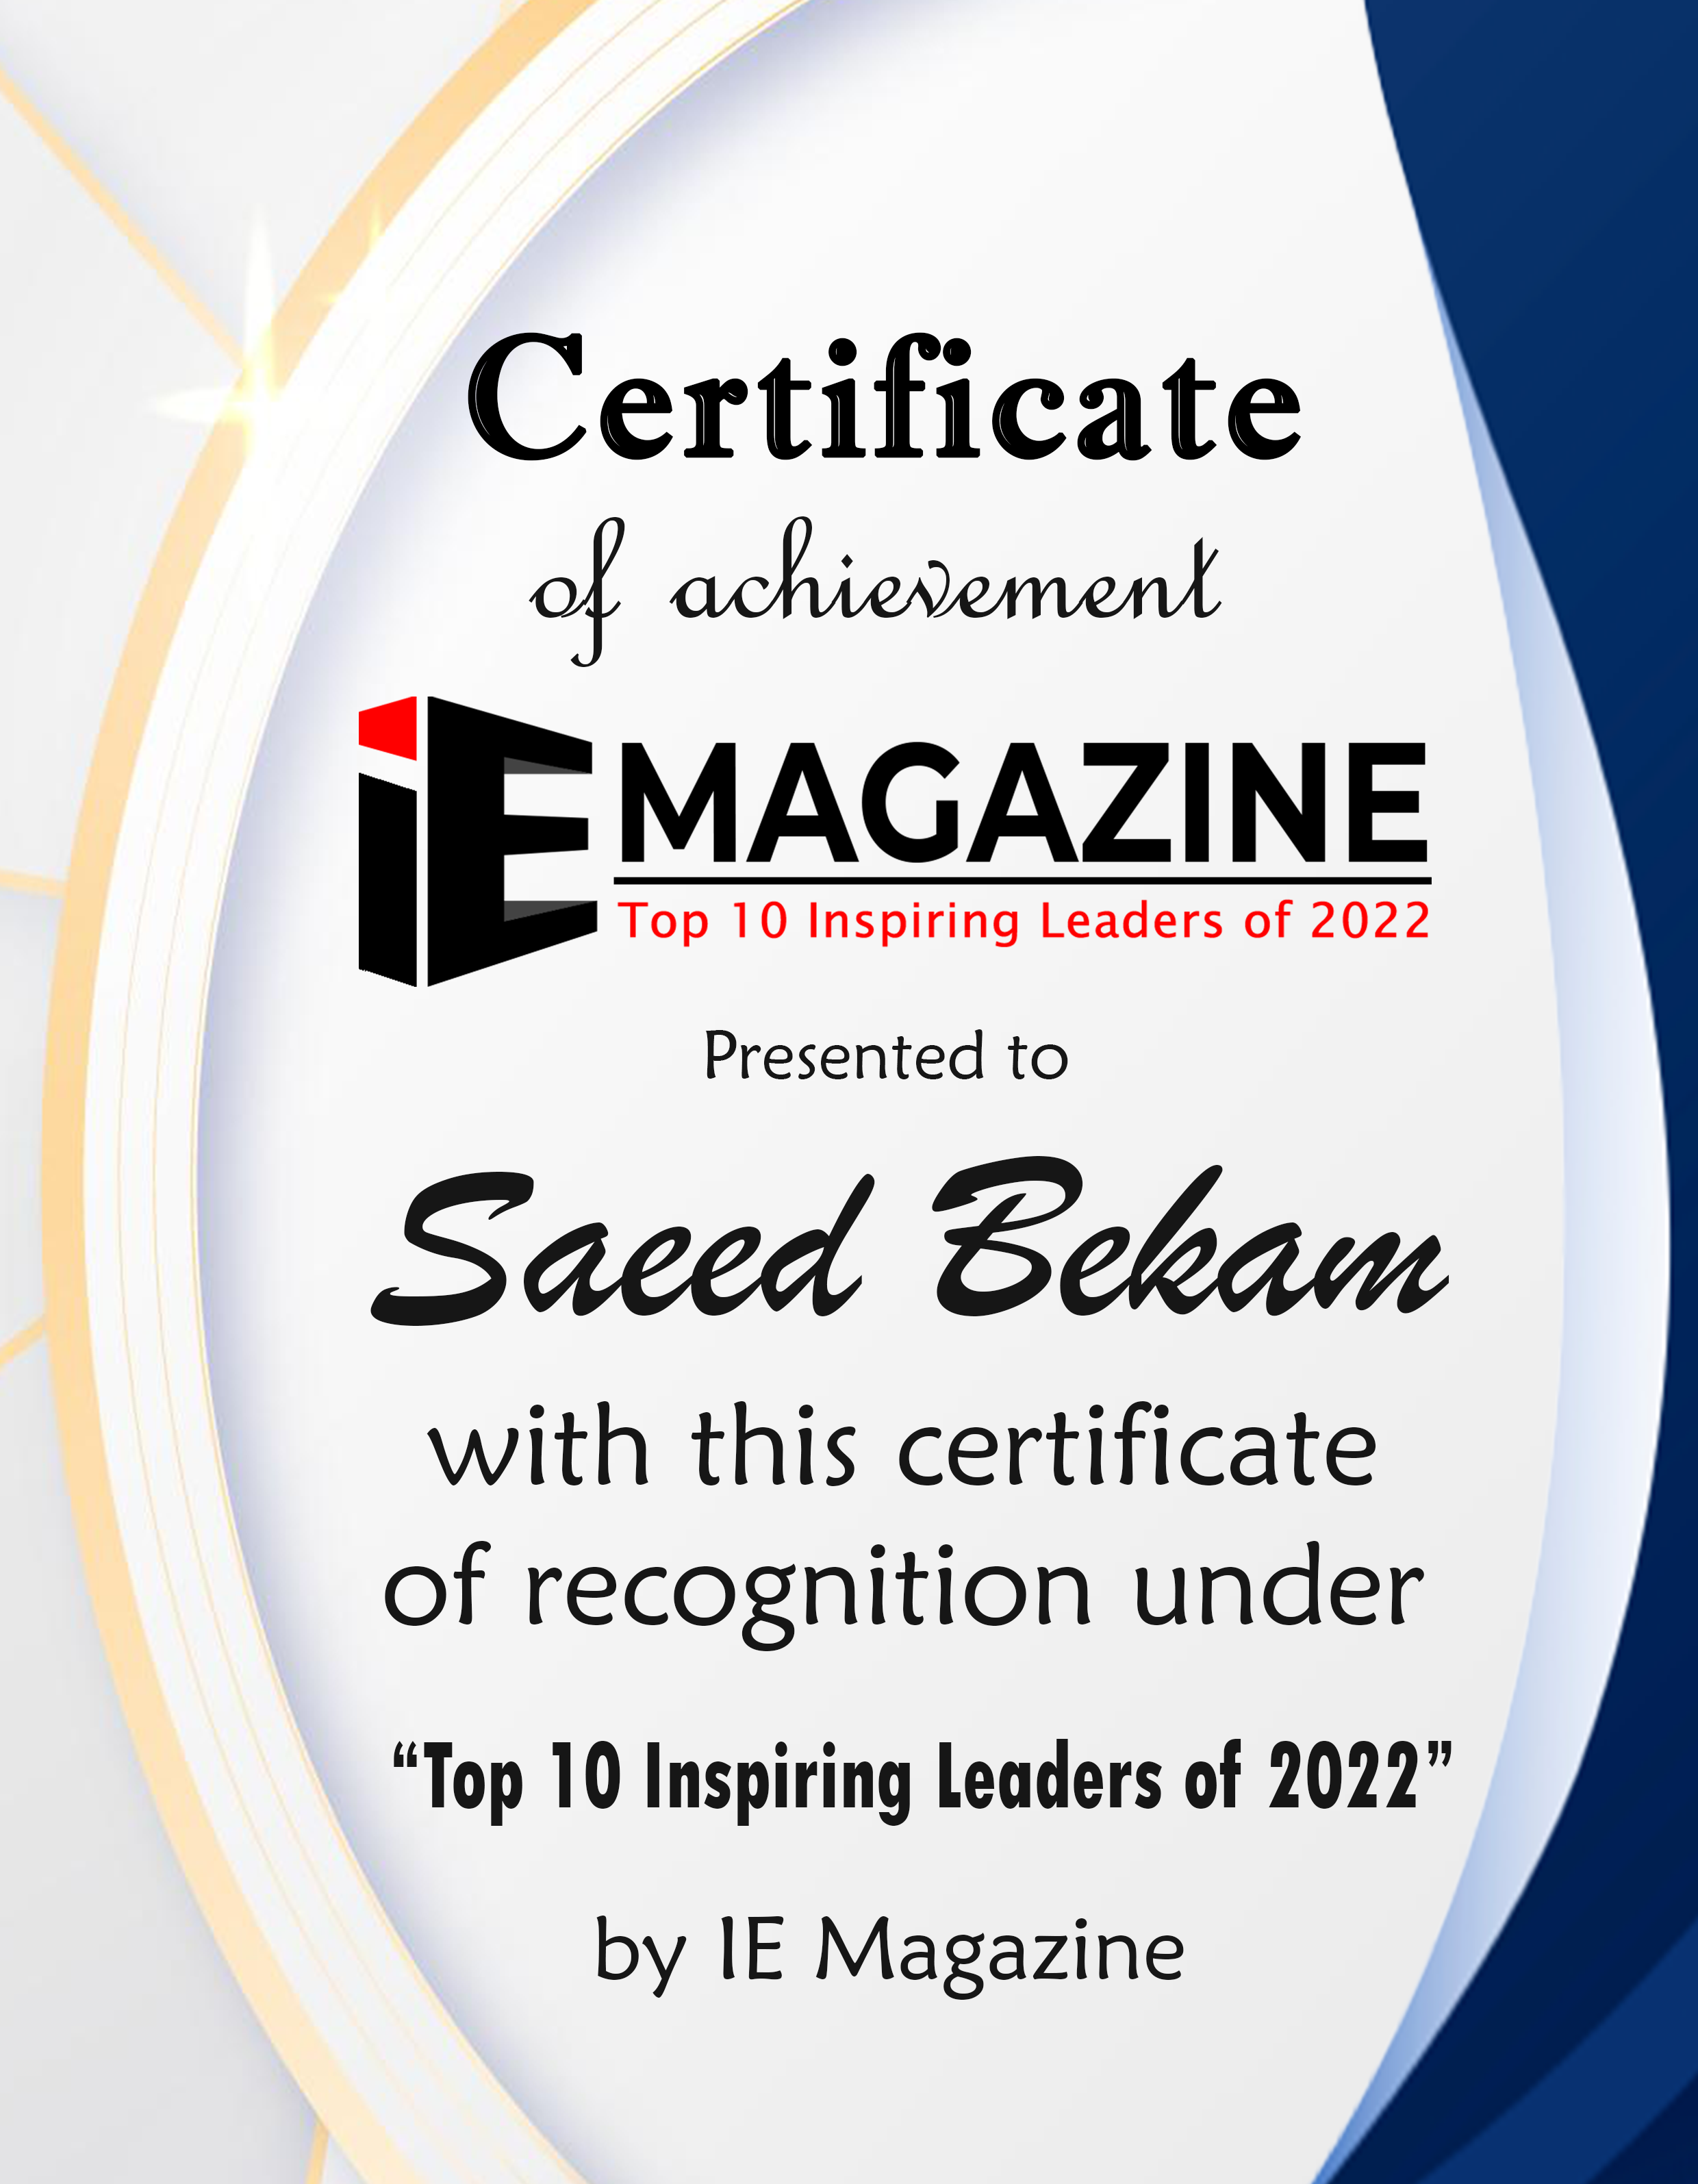 Saeed Bekam, President & CEO at Gouvis Engineering Consulting Group Certificate